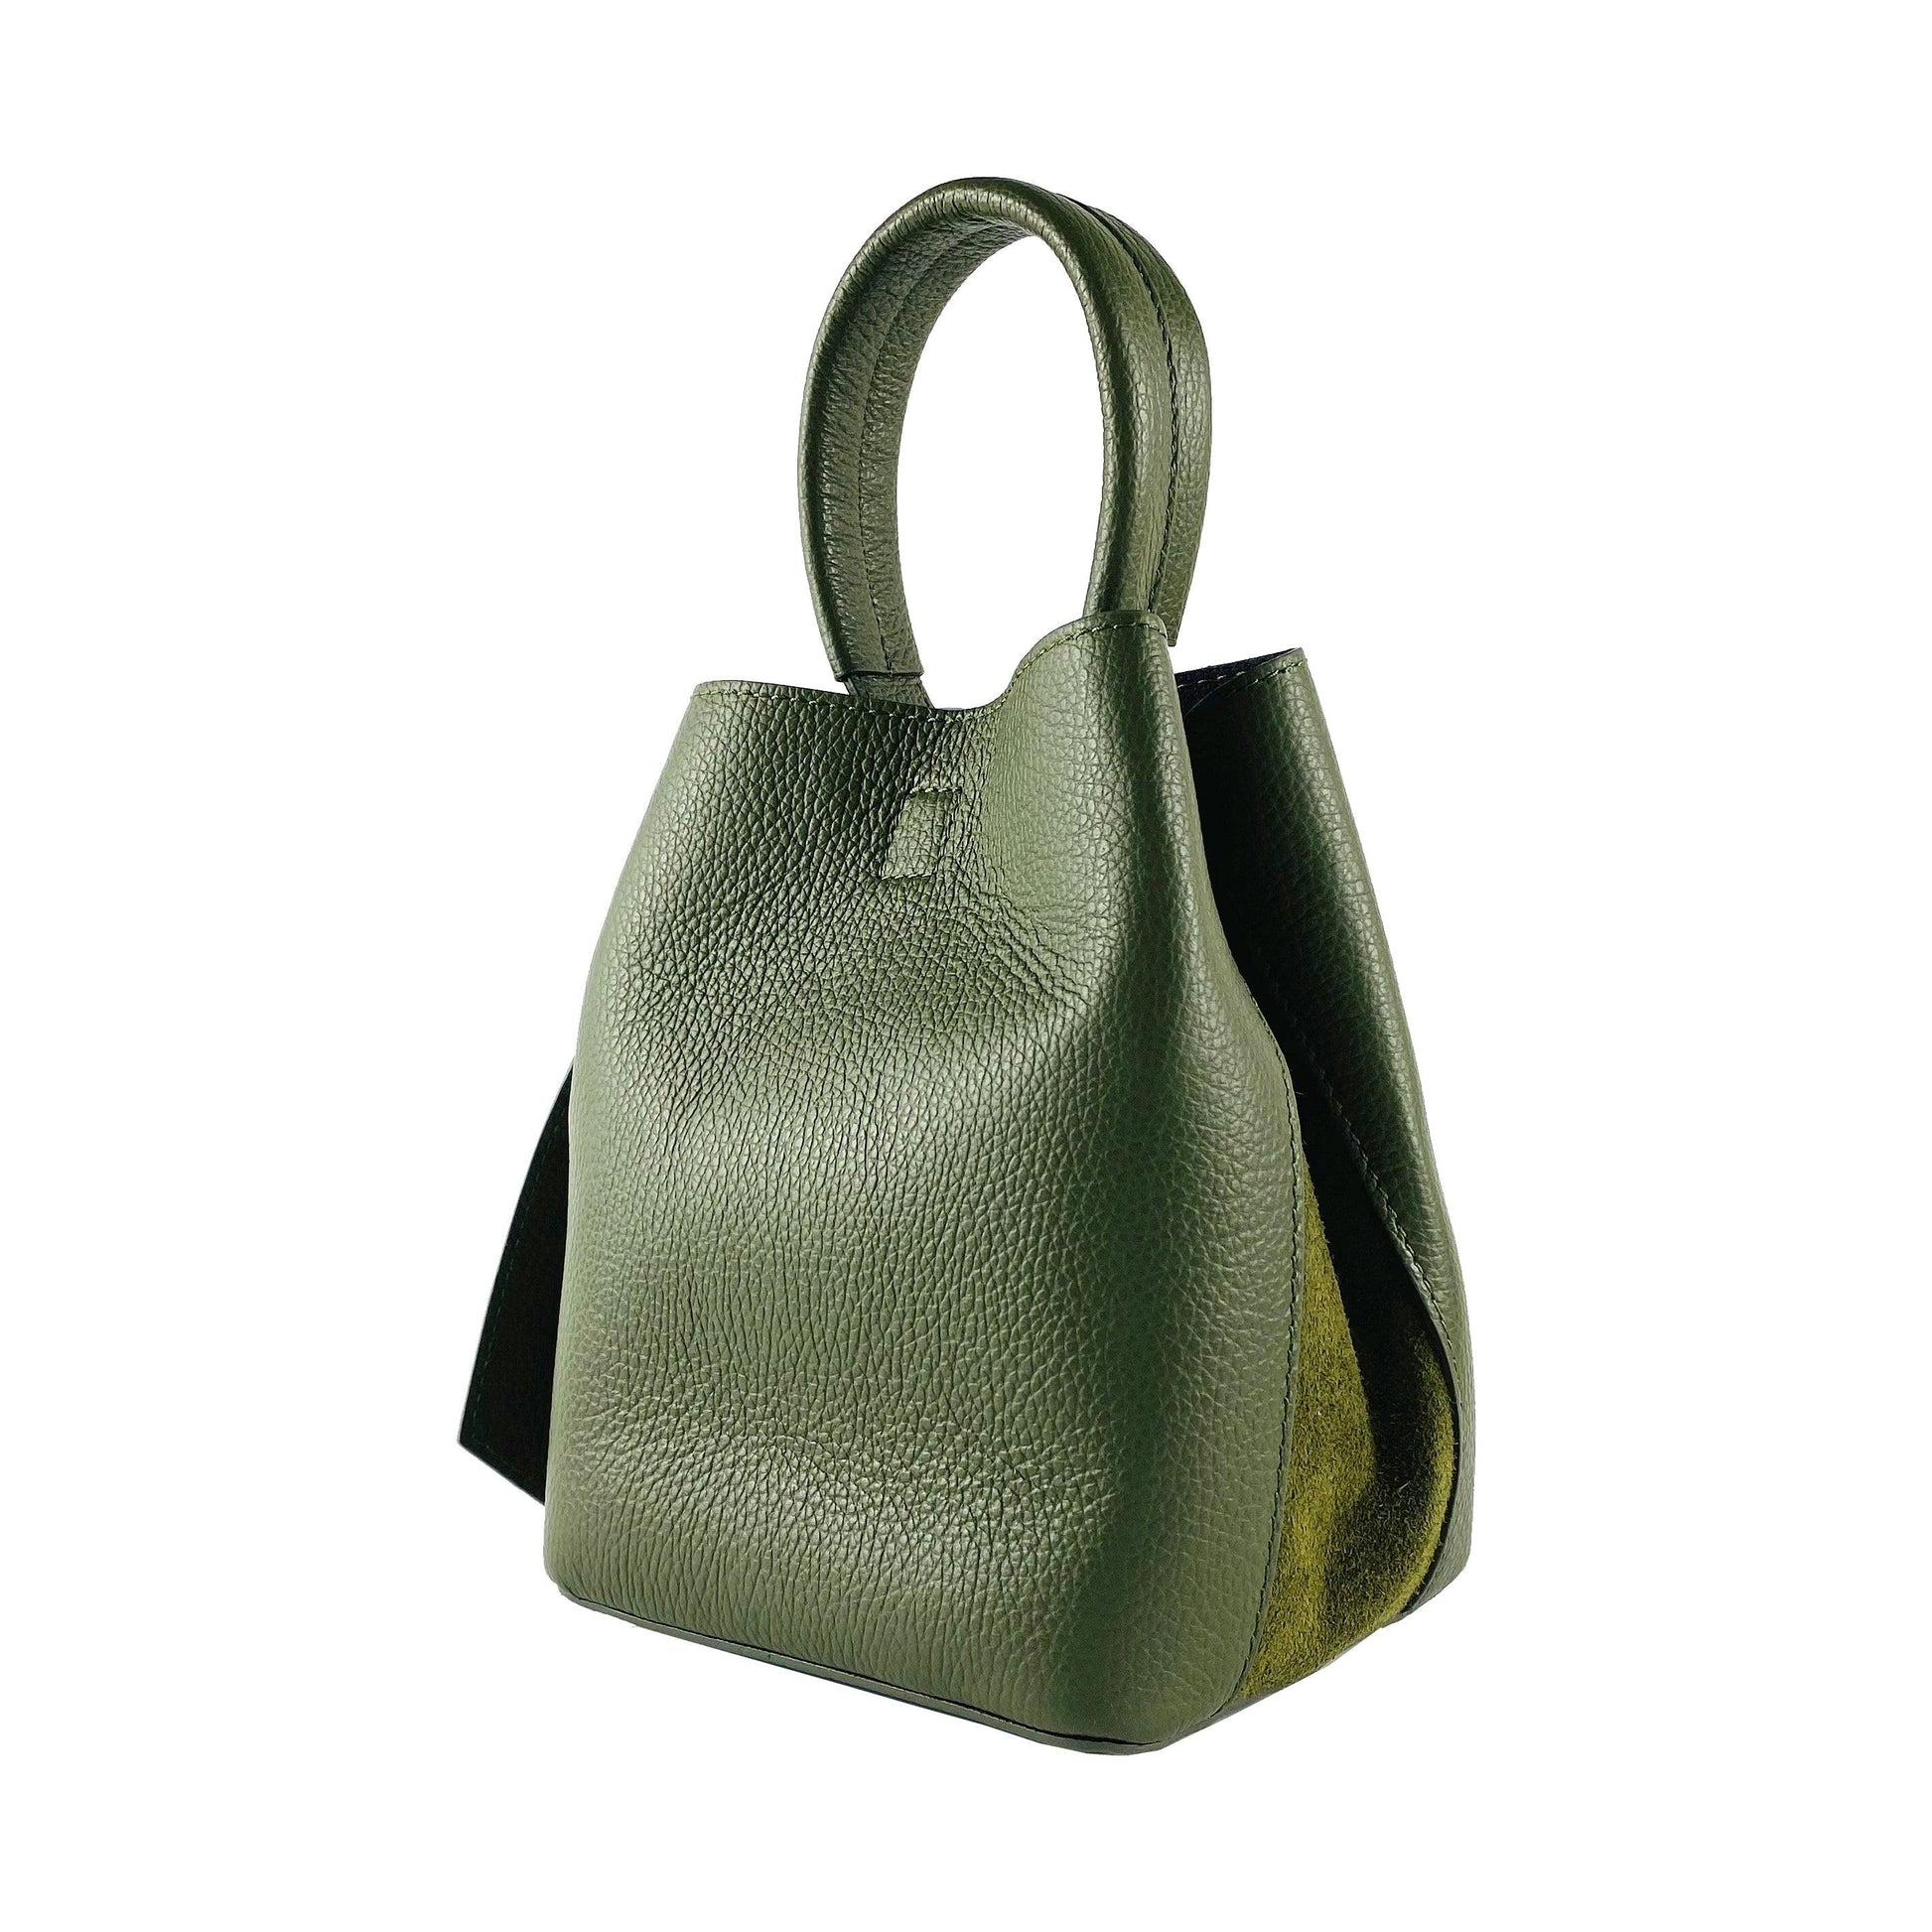 RB1006E | Women's Bucket Bag with Shoulder Bag in Genuine Leather | 16 x 14 x 21 cm-1